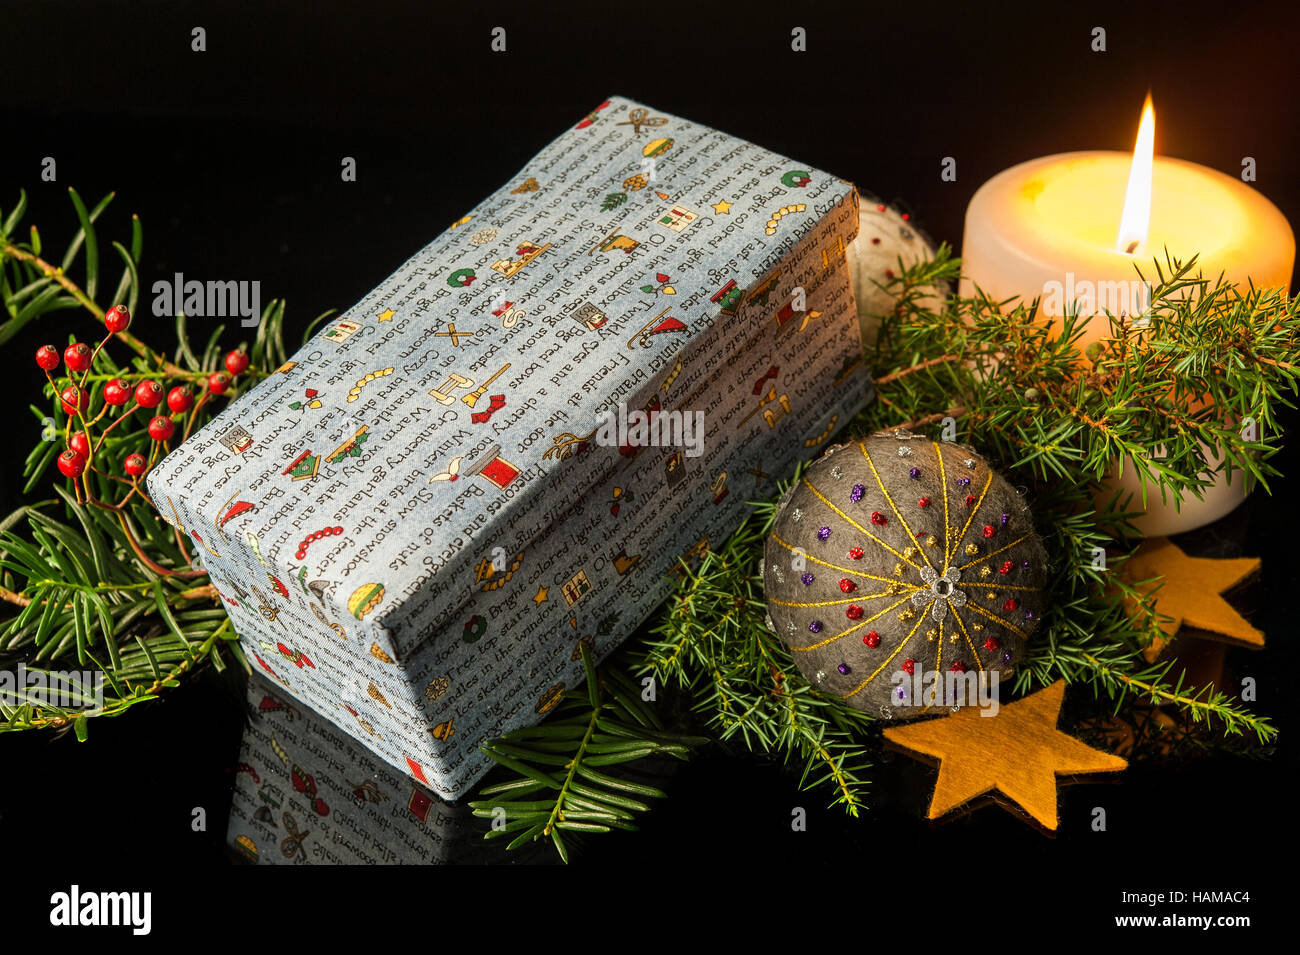 Christmas decoration, box with colourful Christmas theme, lit candle, hand felted and embroidered bauble Stock Photo